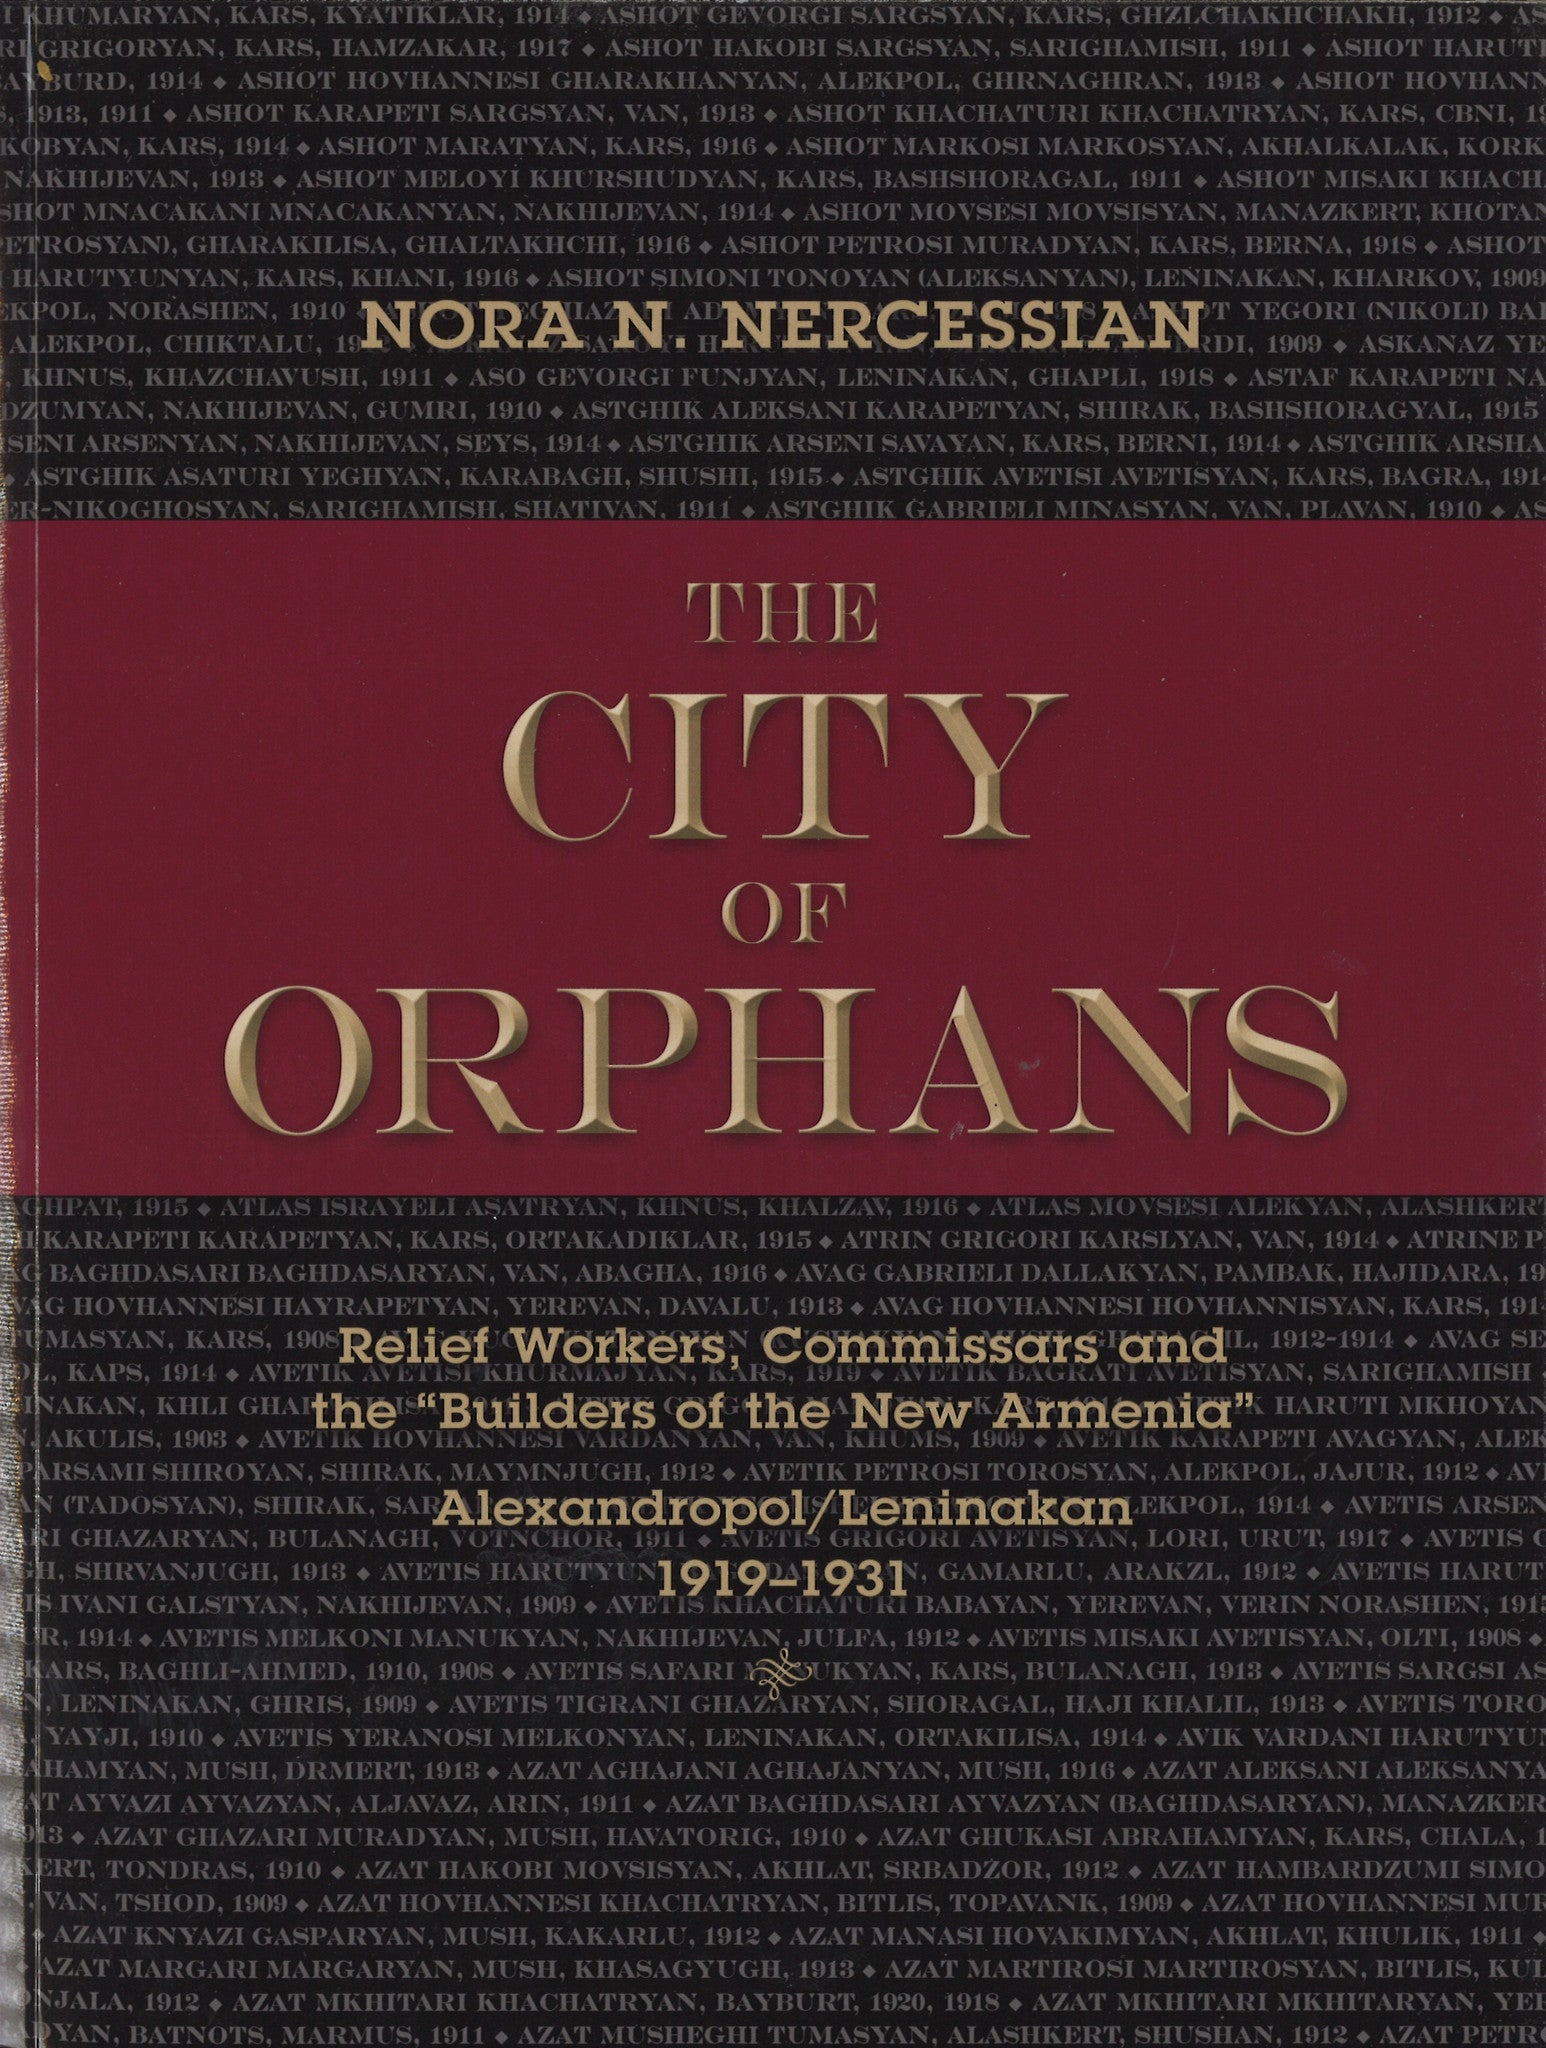 CITY OF ORPHANS, THE: Relief Workers, Commissars and the "Builders of the New Armenia"